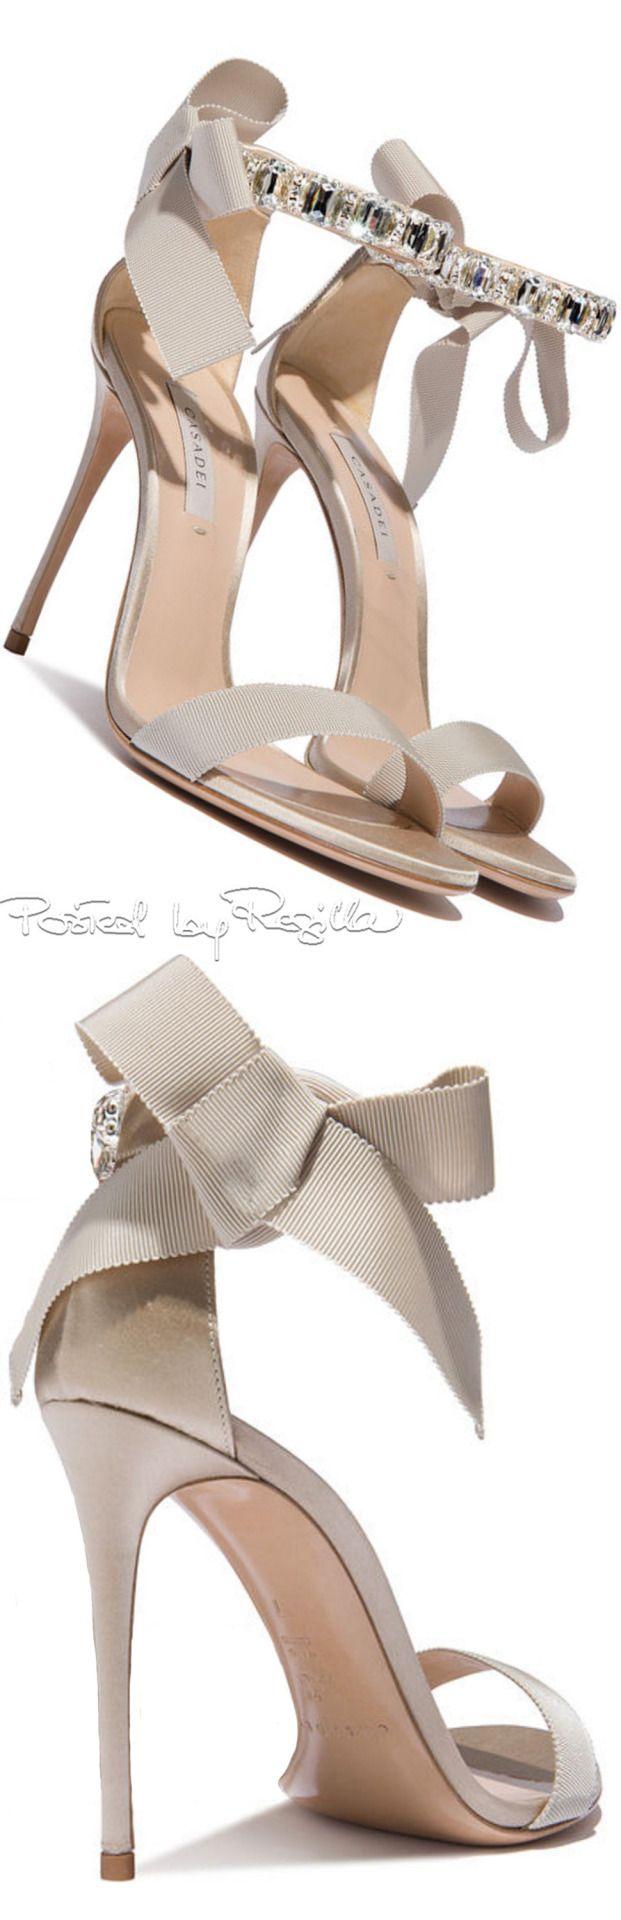 Wedding - Shoes Scarpe Chaussures